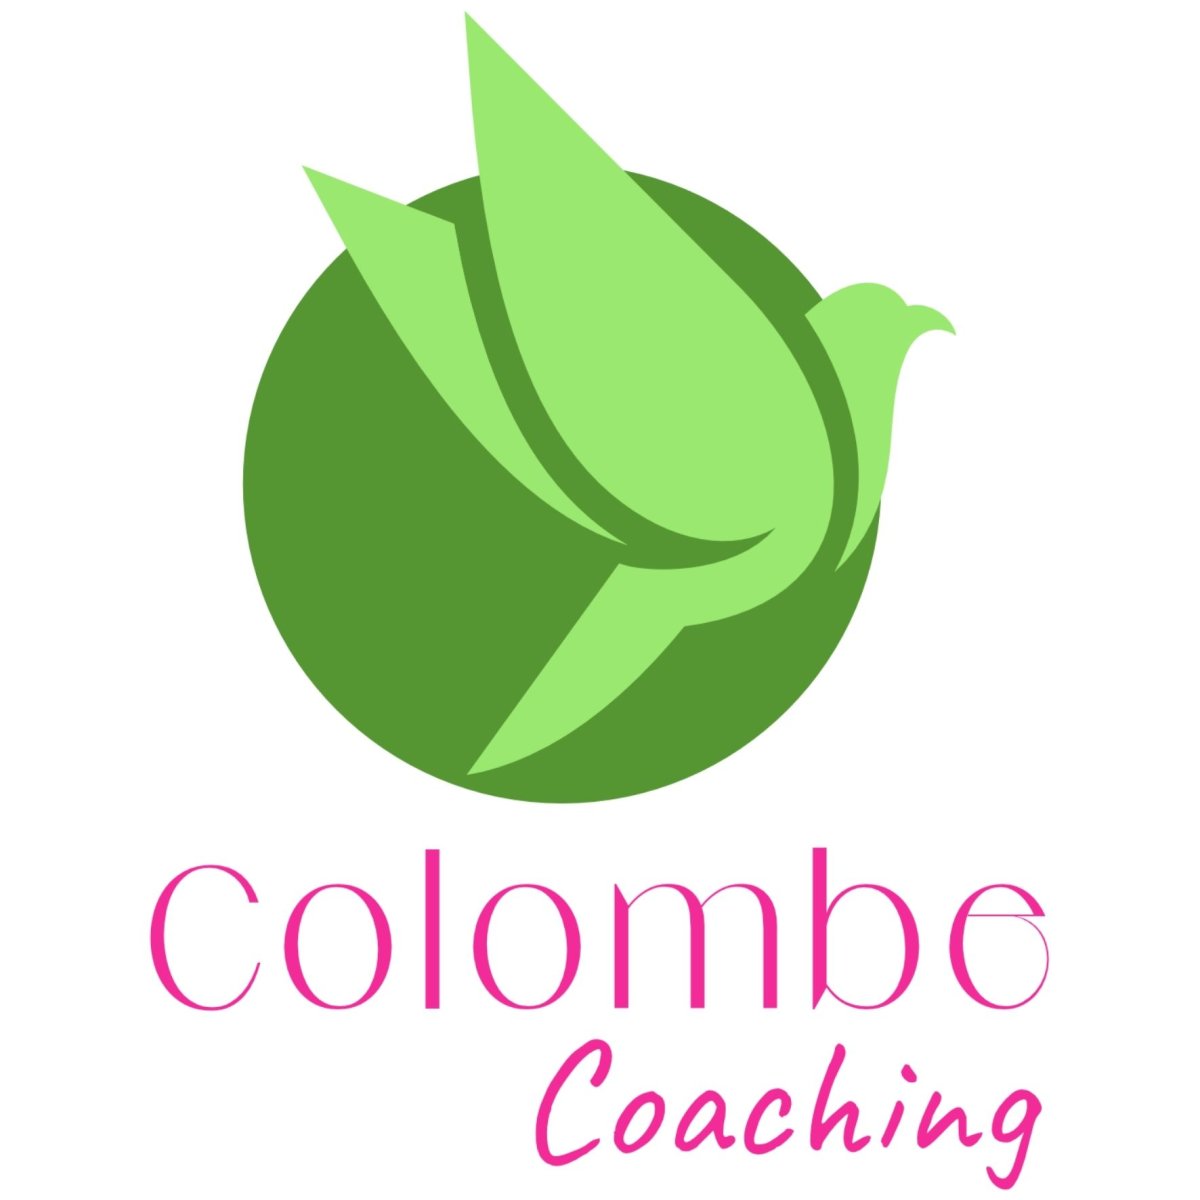 Colombe coaching